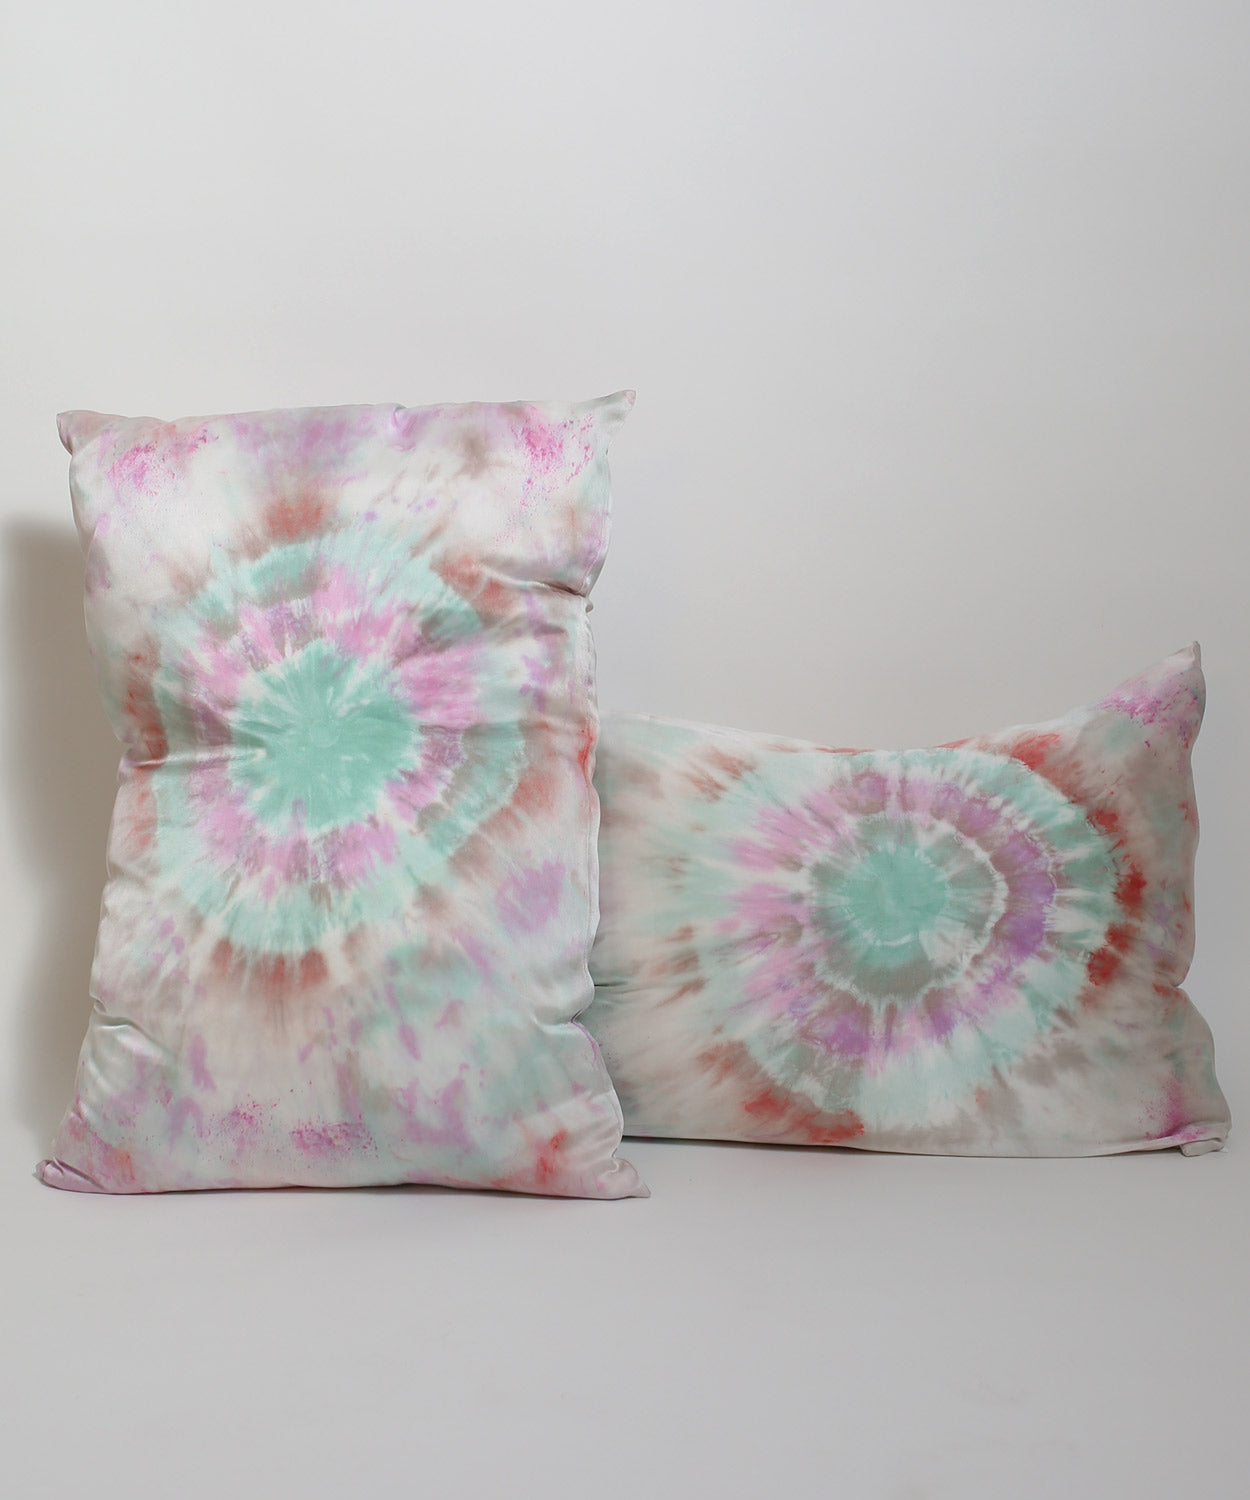 Hand Dyed Silk Pillowcase Set in Dragonfly